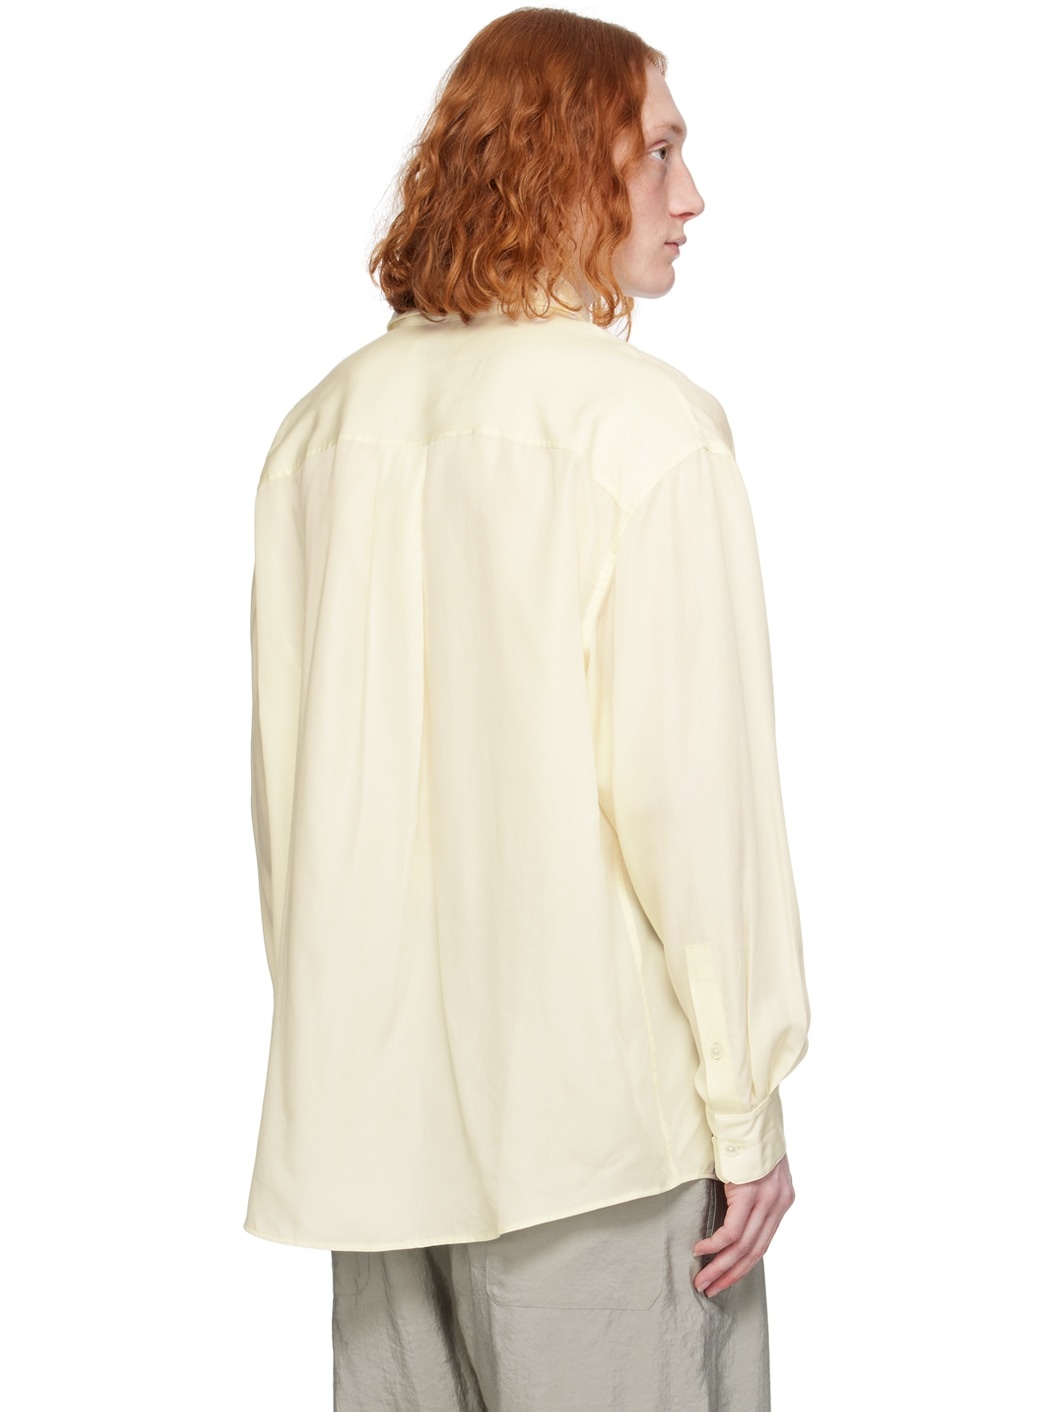 Off-White Patch Pocket Shirt - 3